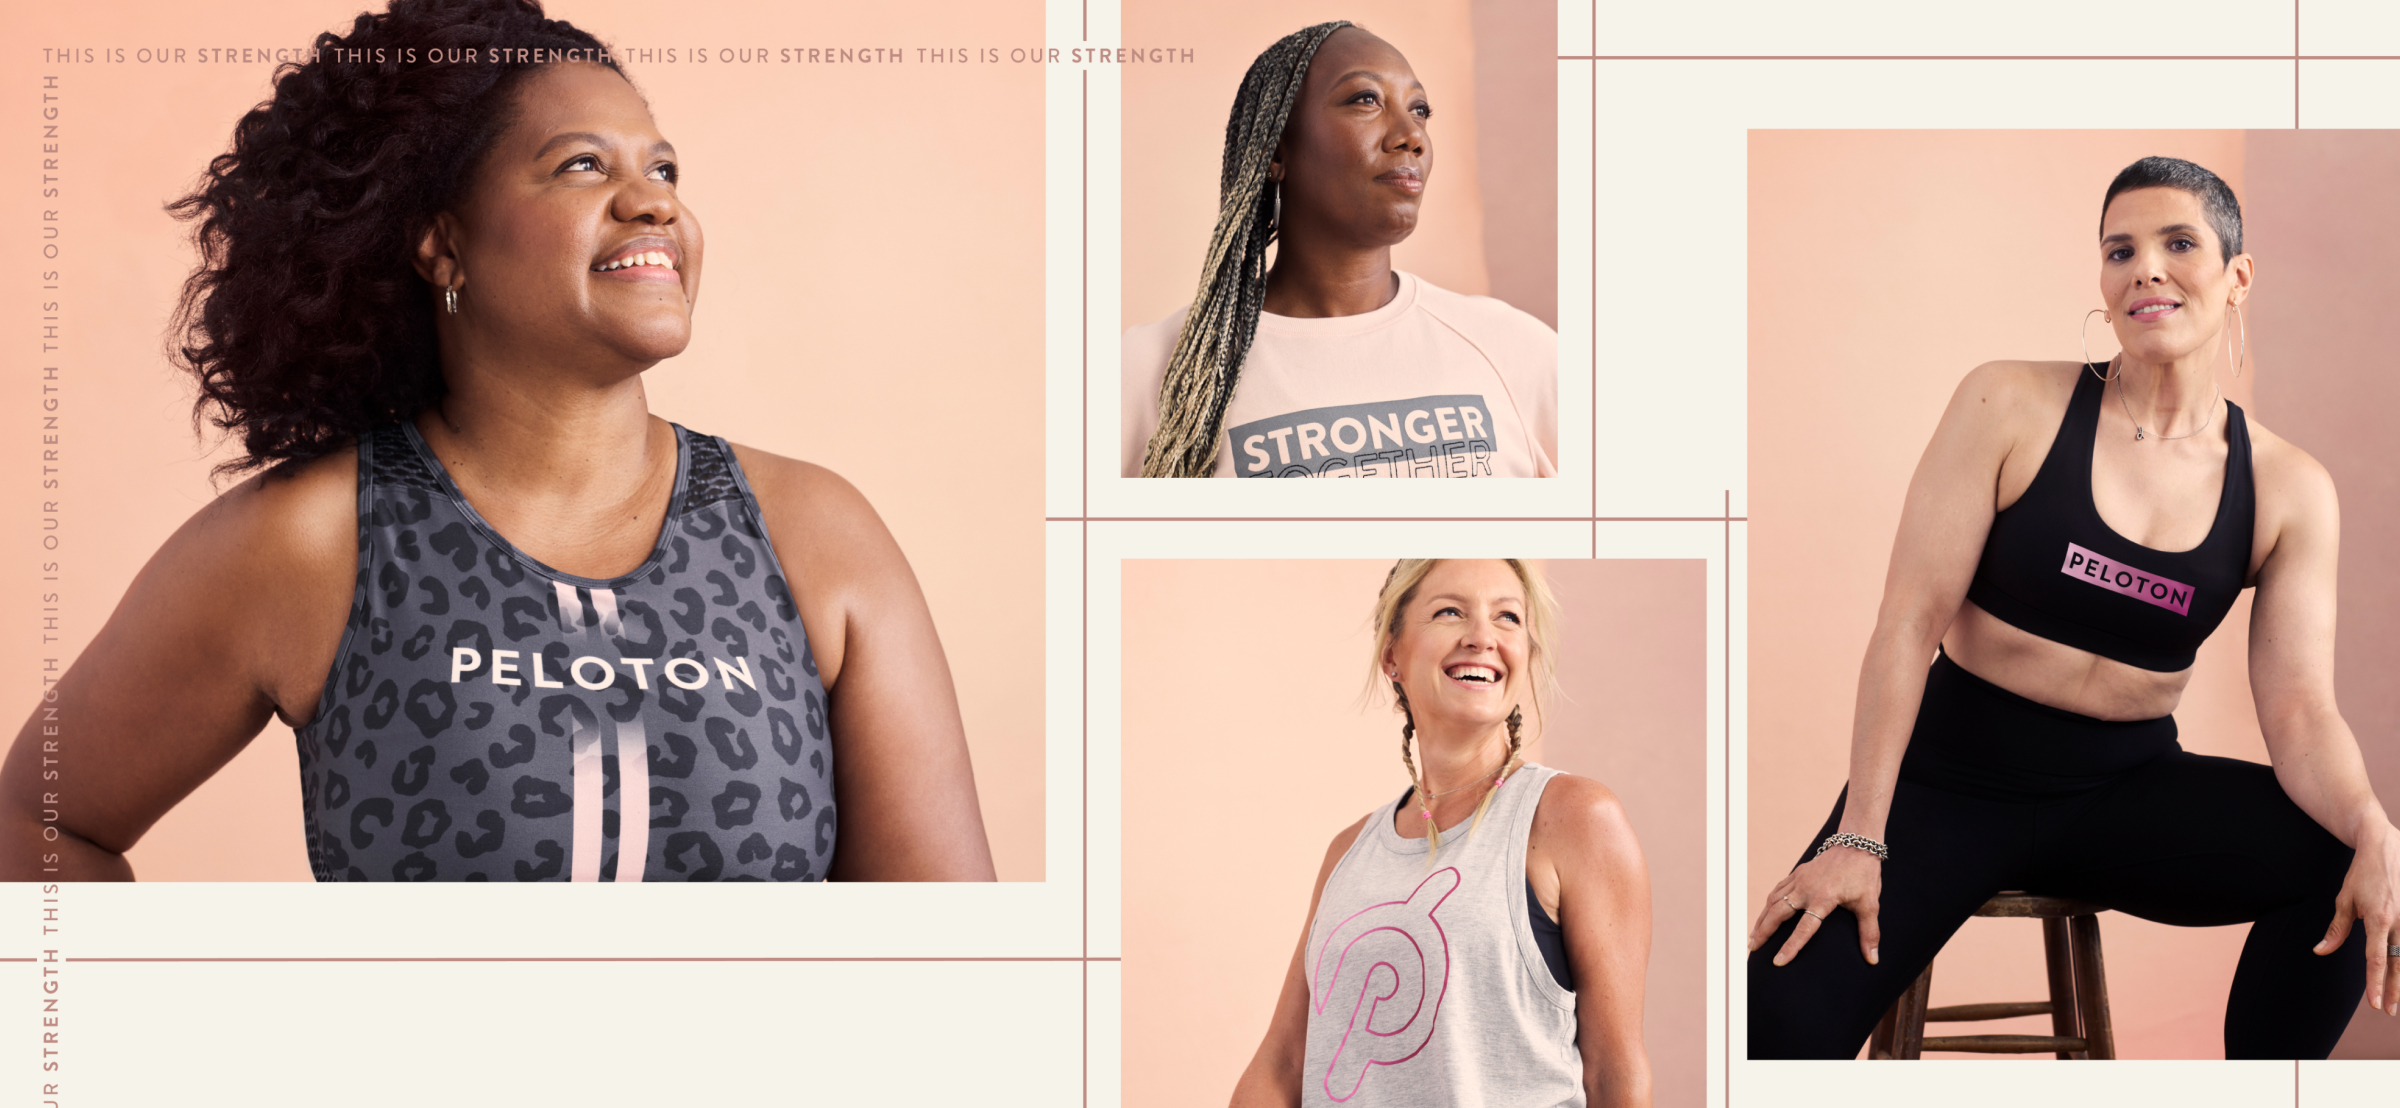 New Peloton Breast Cancer Awareness Apparel Collection by Leanne Hainsby ( Boob Check) for charity with CoppaFeel - Peloton Buddy